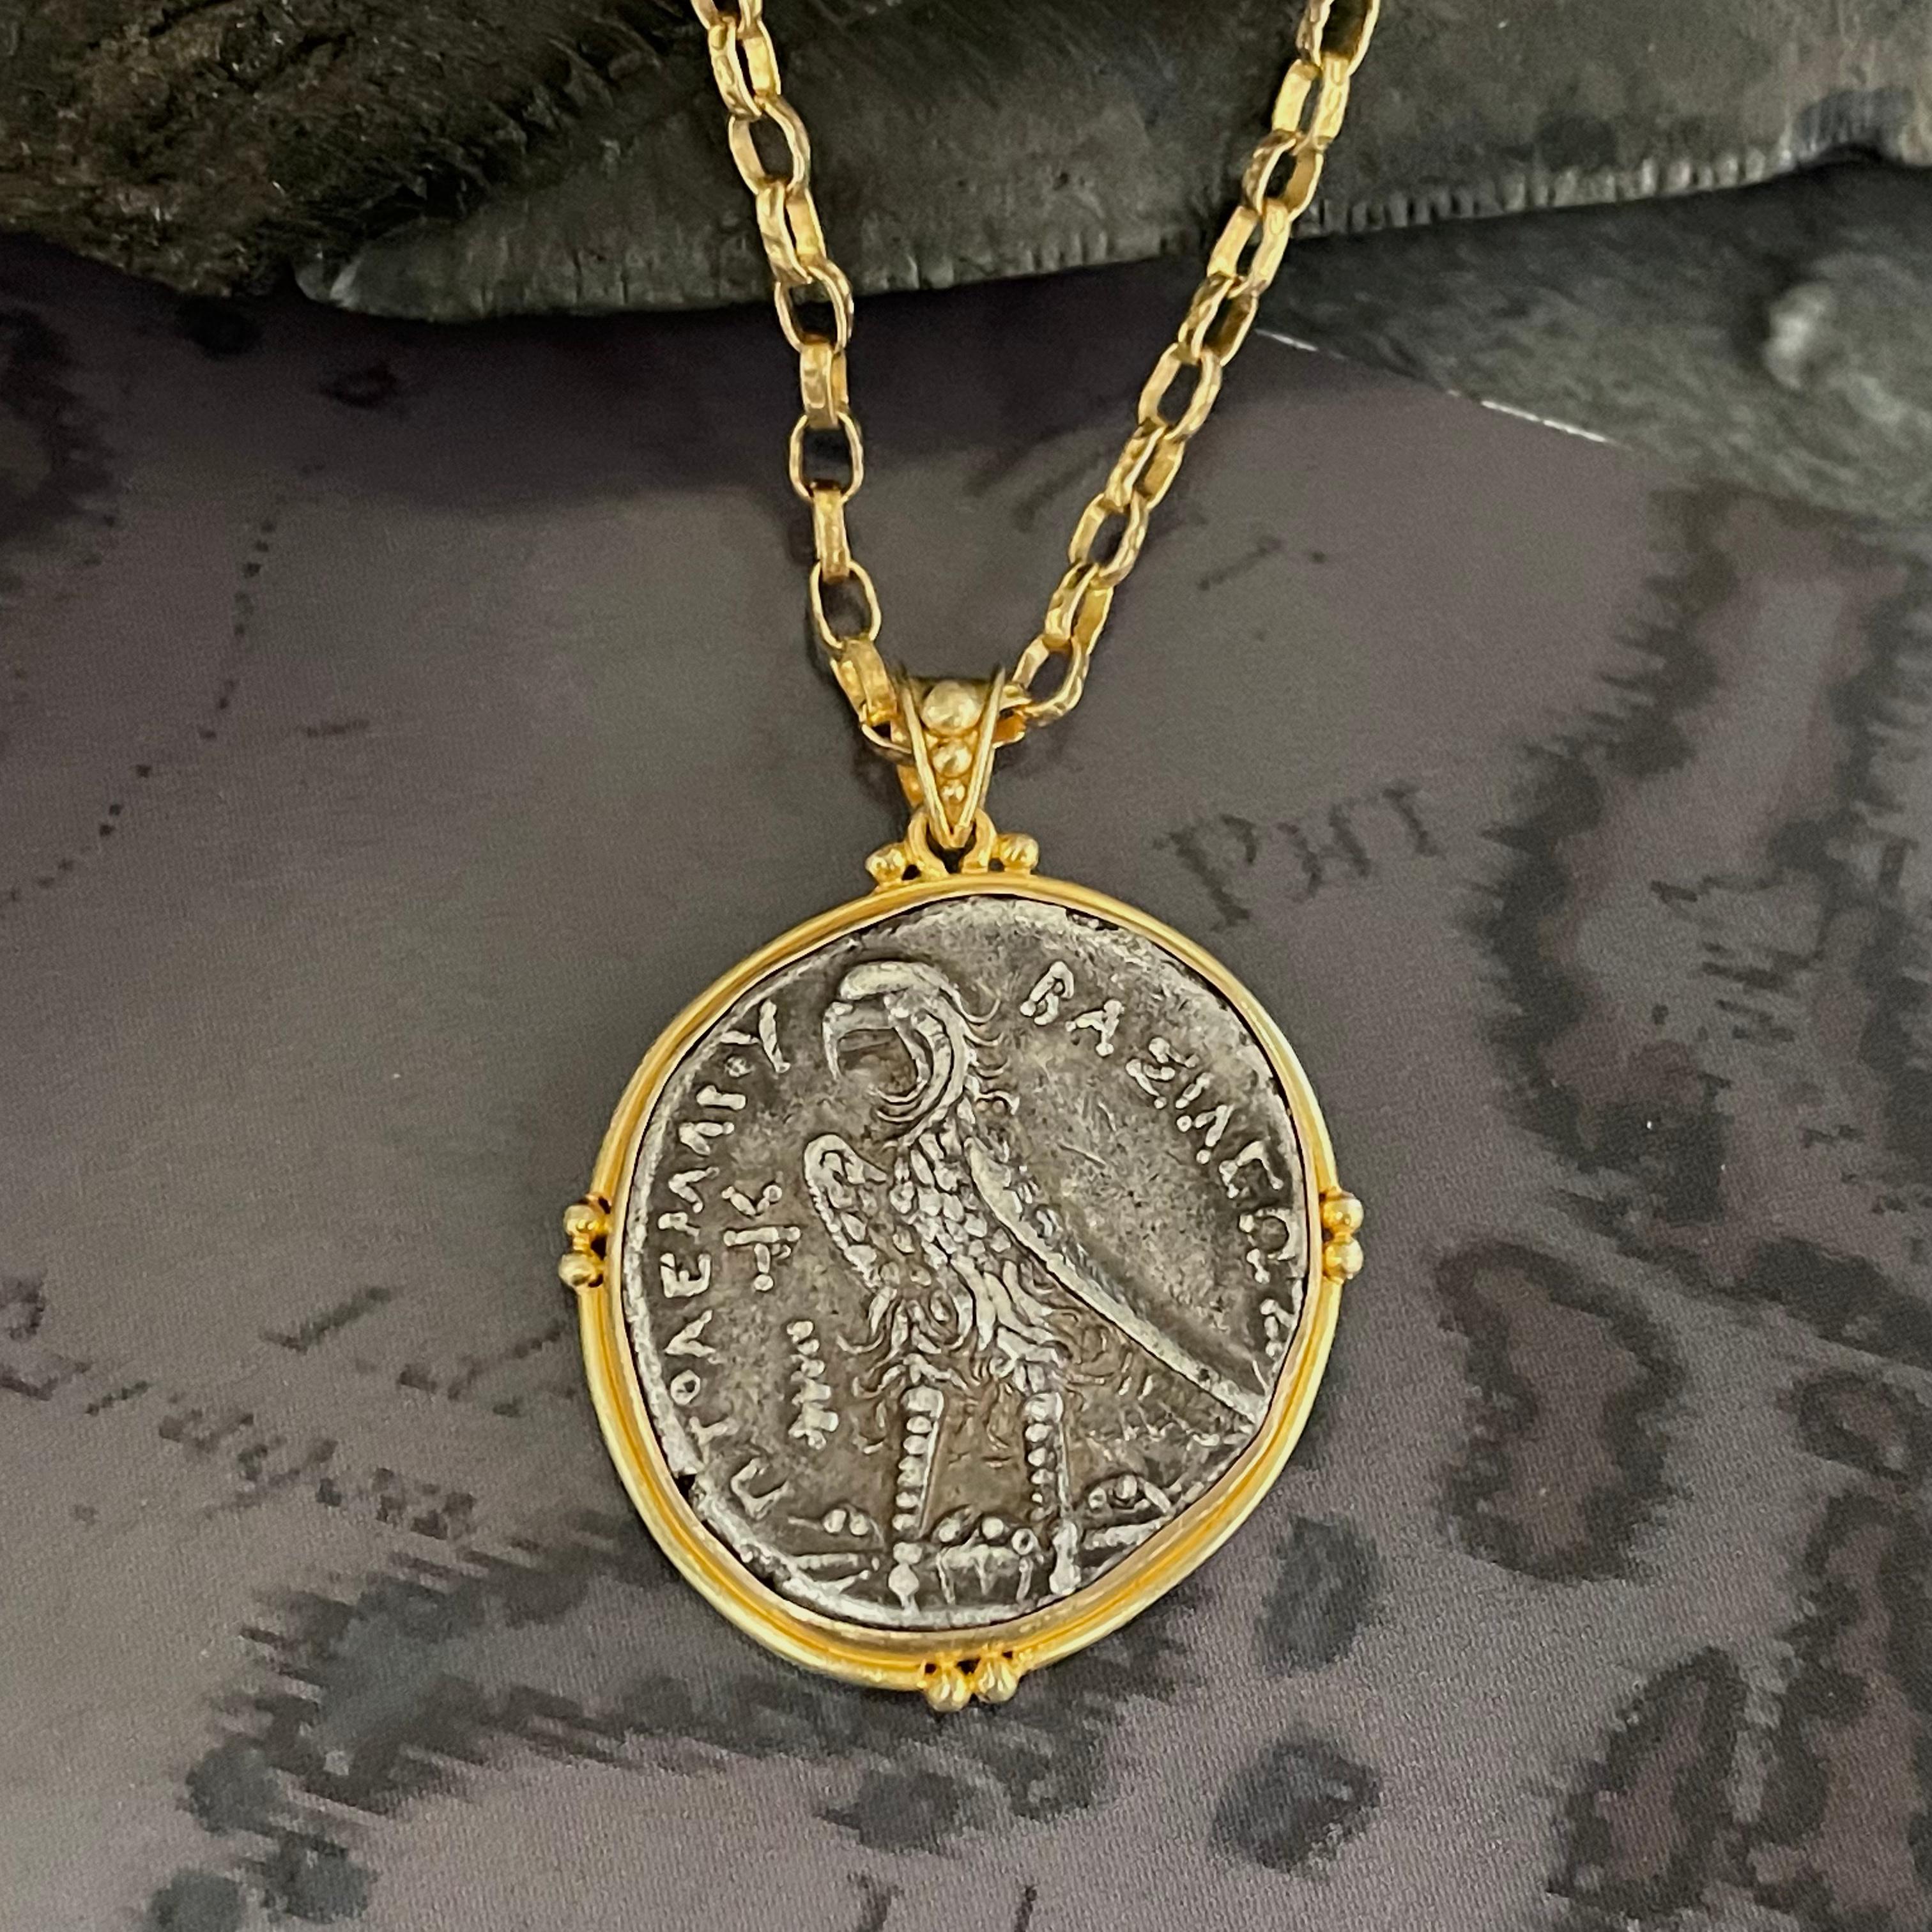 An authentic Ancient Greek coin from the Ptolemaic Dynasty in Egypt is set in this ancient-inspired handmade 18K setting designed by Steven Battelle  This Hellenistic (Greek) Kingdom in Egypt was founded in 305 BC by Ptolemy I Soter, a companion of